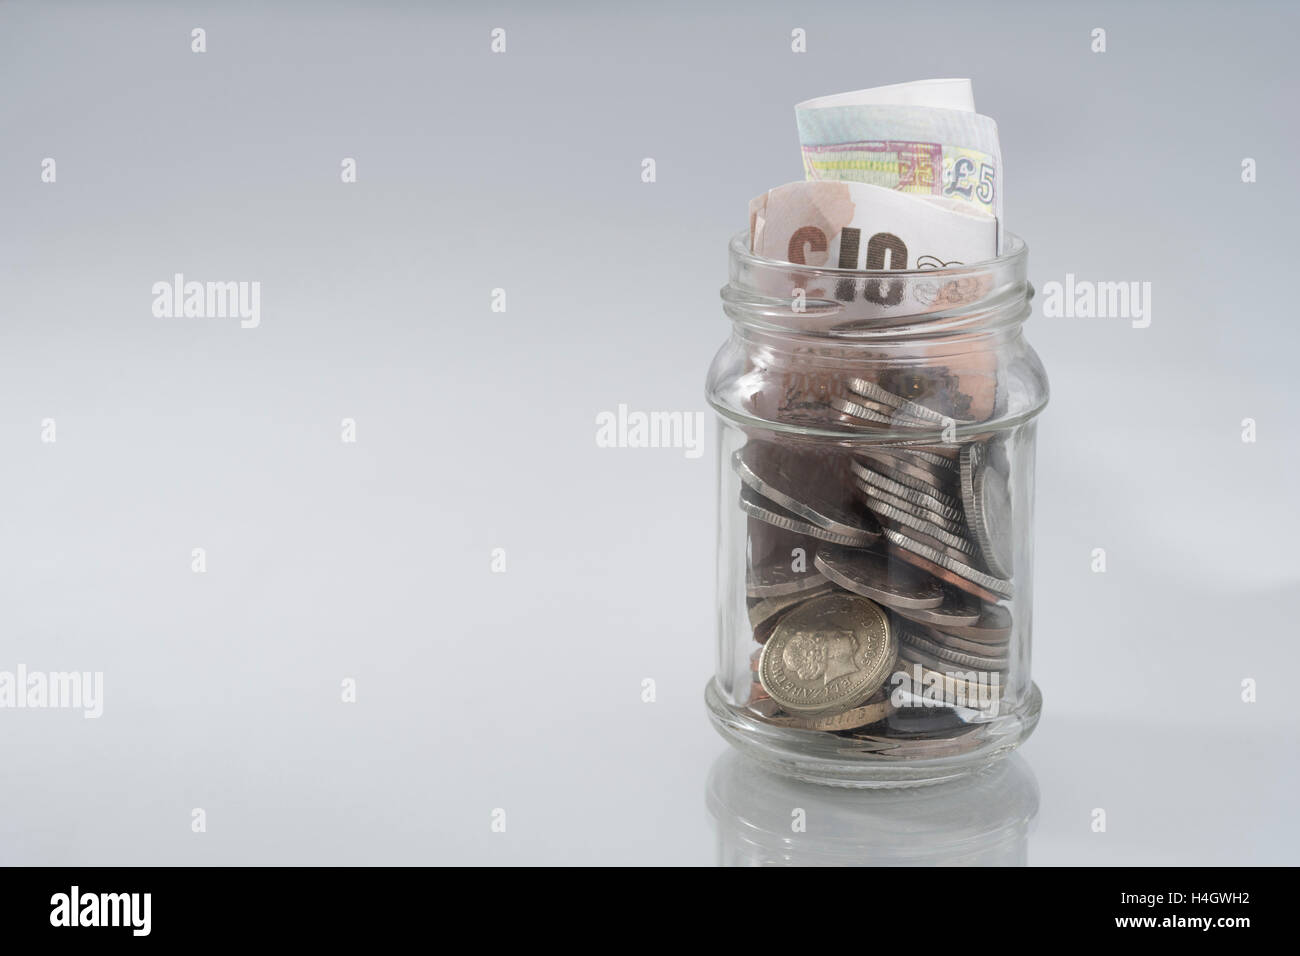 Picture of jam jar with loose change & money. Metaphor cost of living, disposable income, rainy day savings/saving money concept, saving pot, poverty. Stock Photo